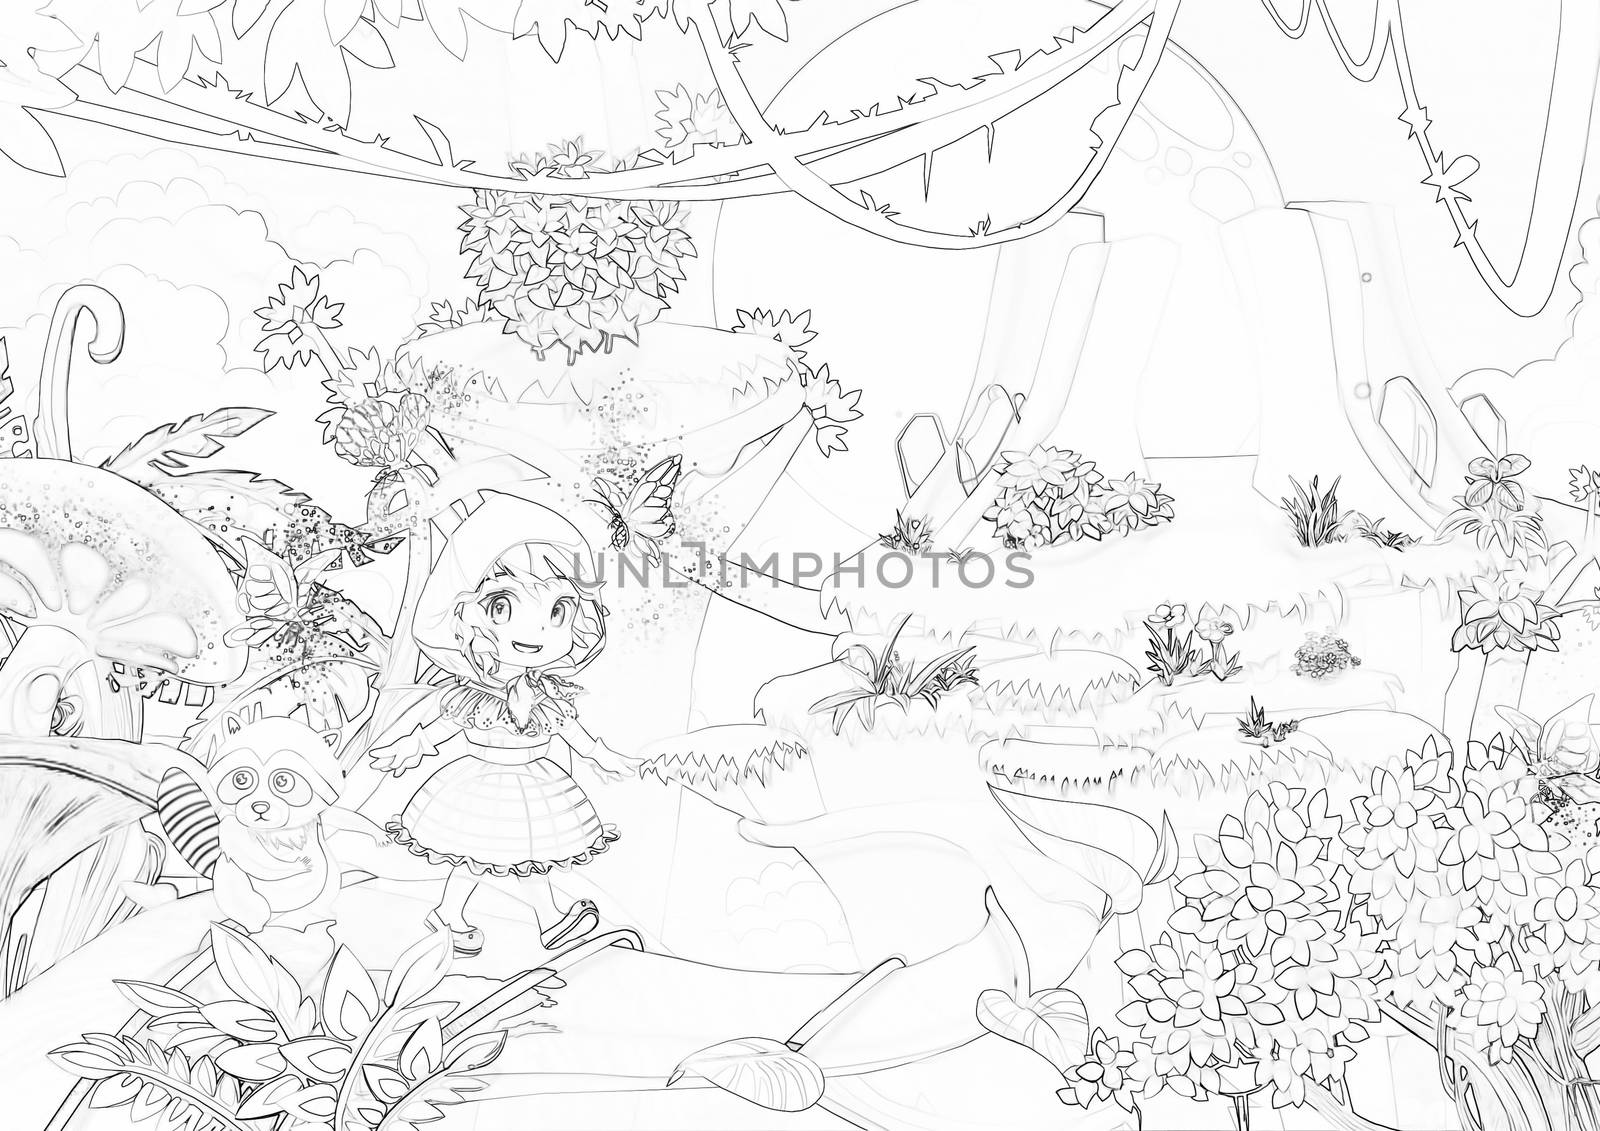 Illustration: Coloring Book Series: Walking Through the Mountains. Soft thin line. Print it and bring it to Life with Color! Fantastic Outline / Sketch / Line Art Design.